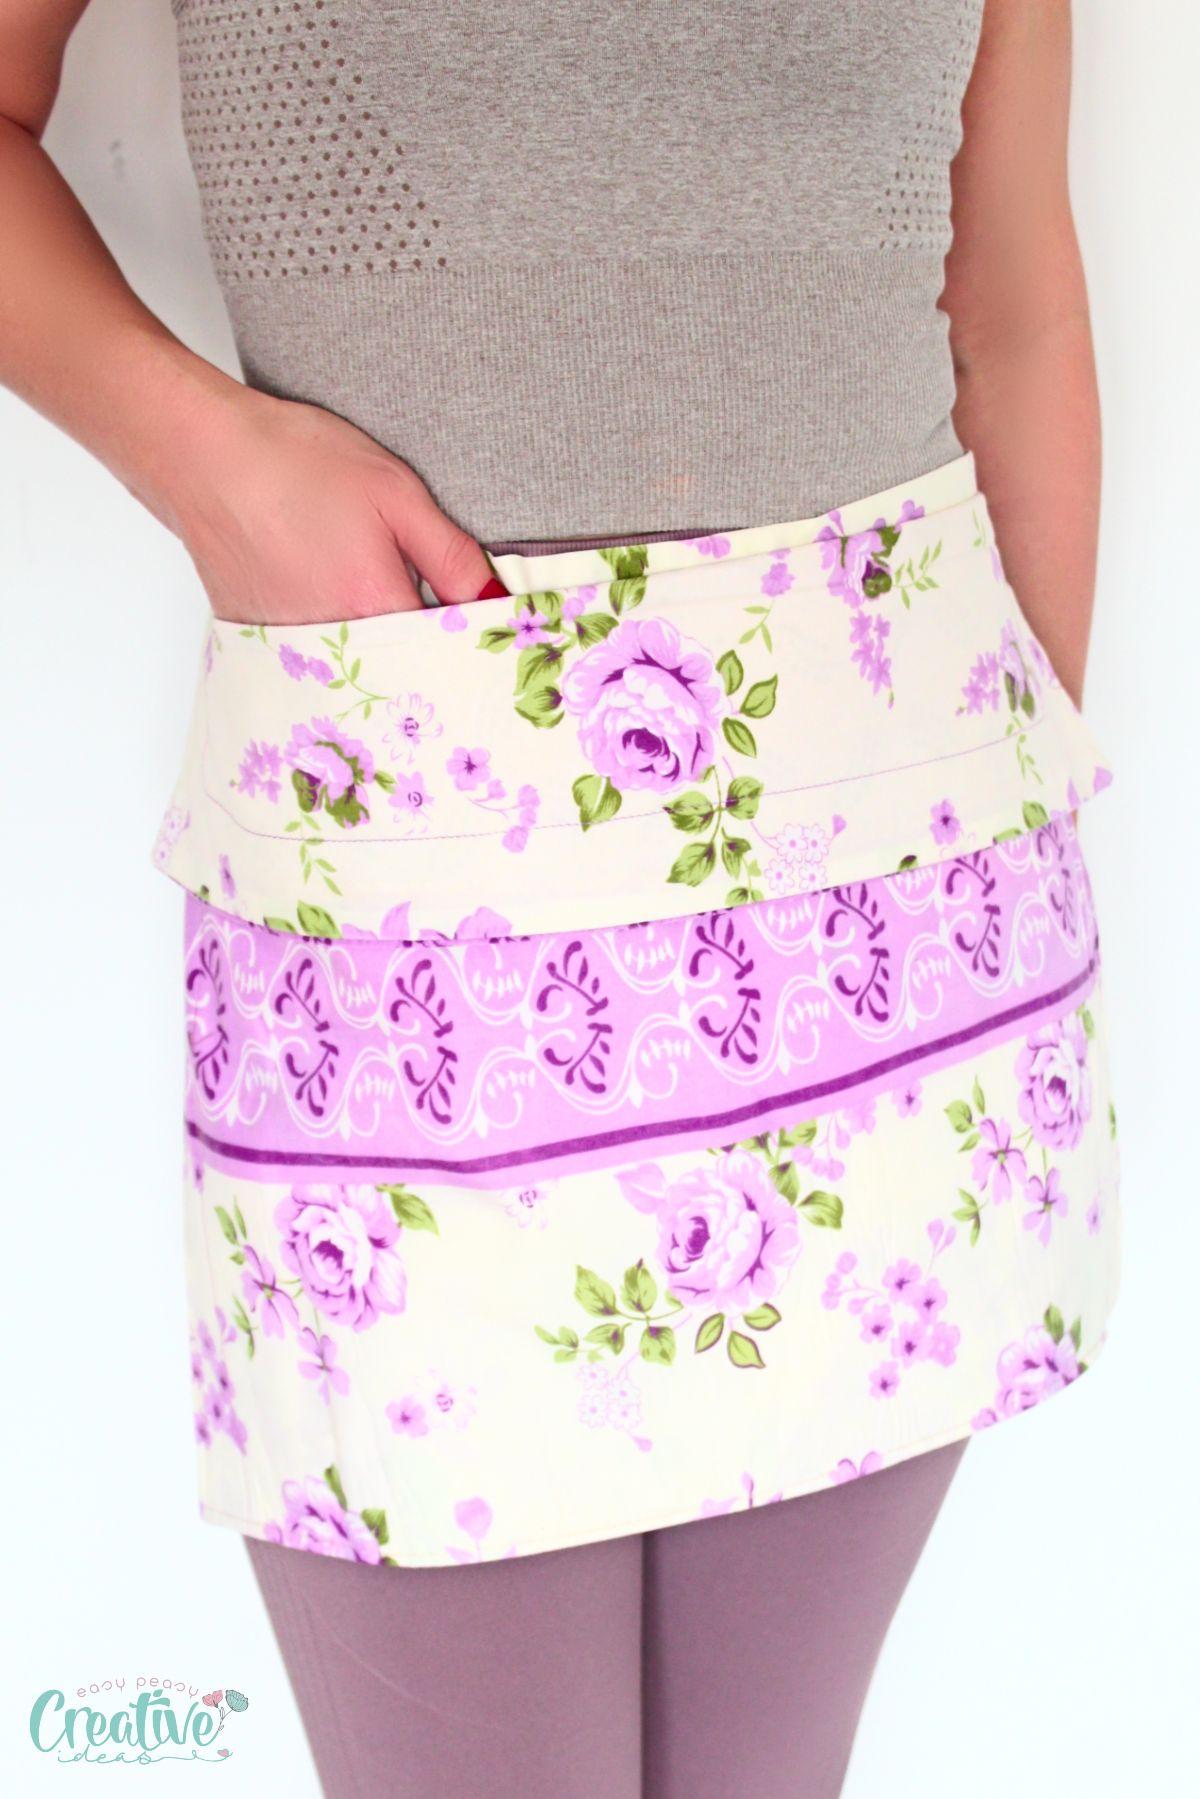 A step-by-step tutorial for creating a cute half apron using a pillowcase. Sewing enthusiasts will love this quick and easy project!